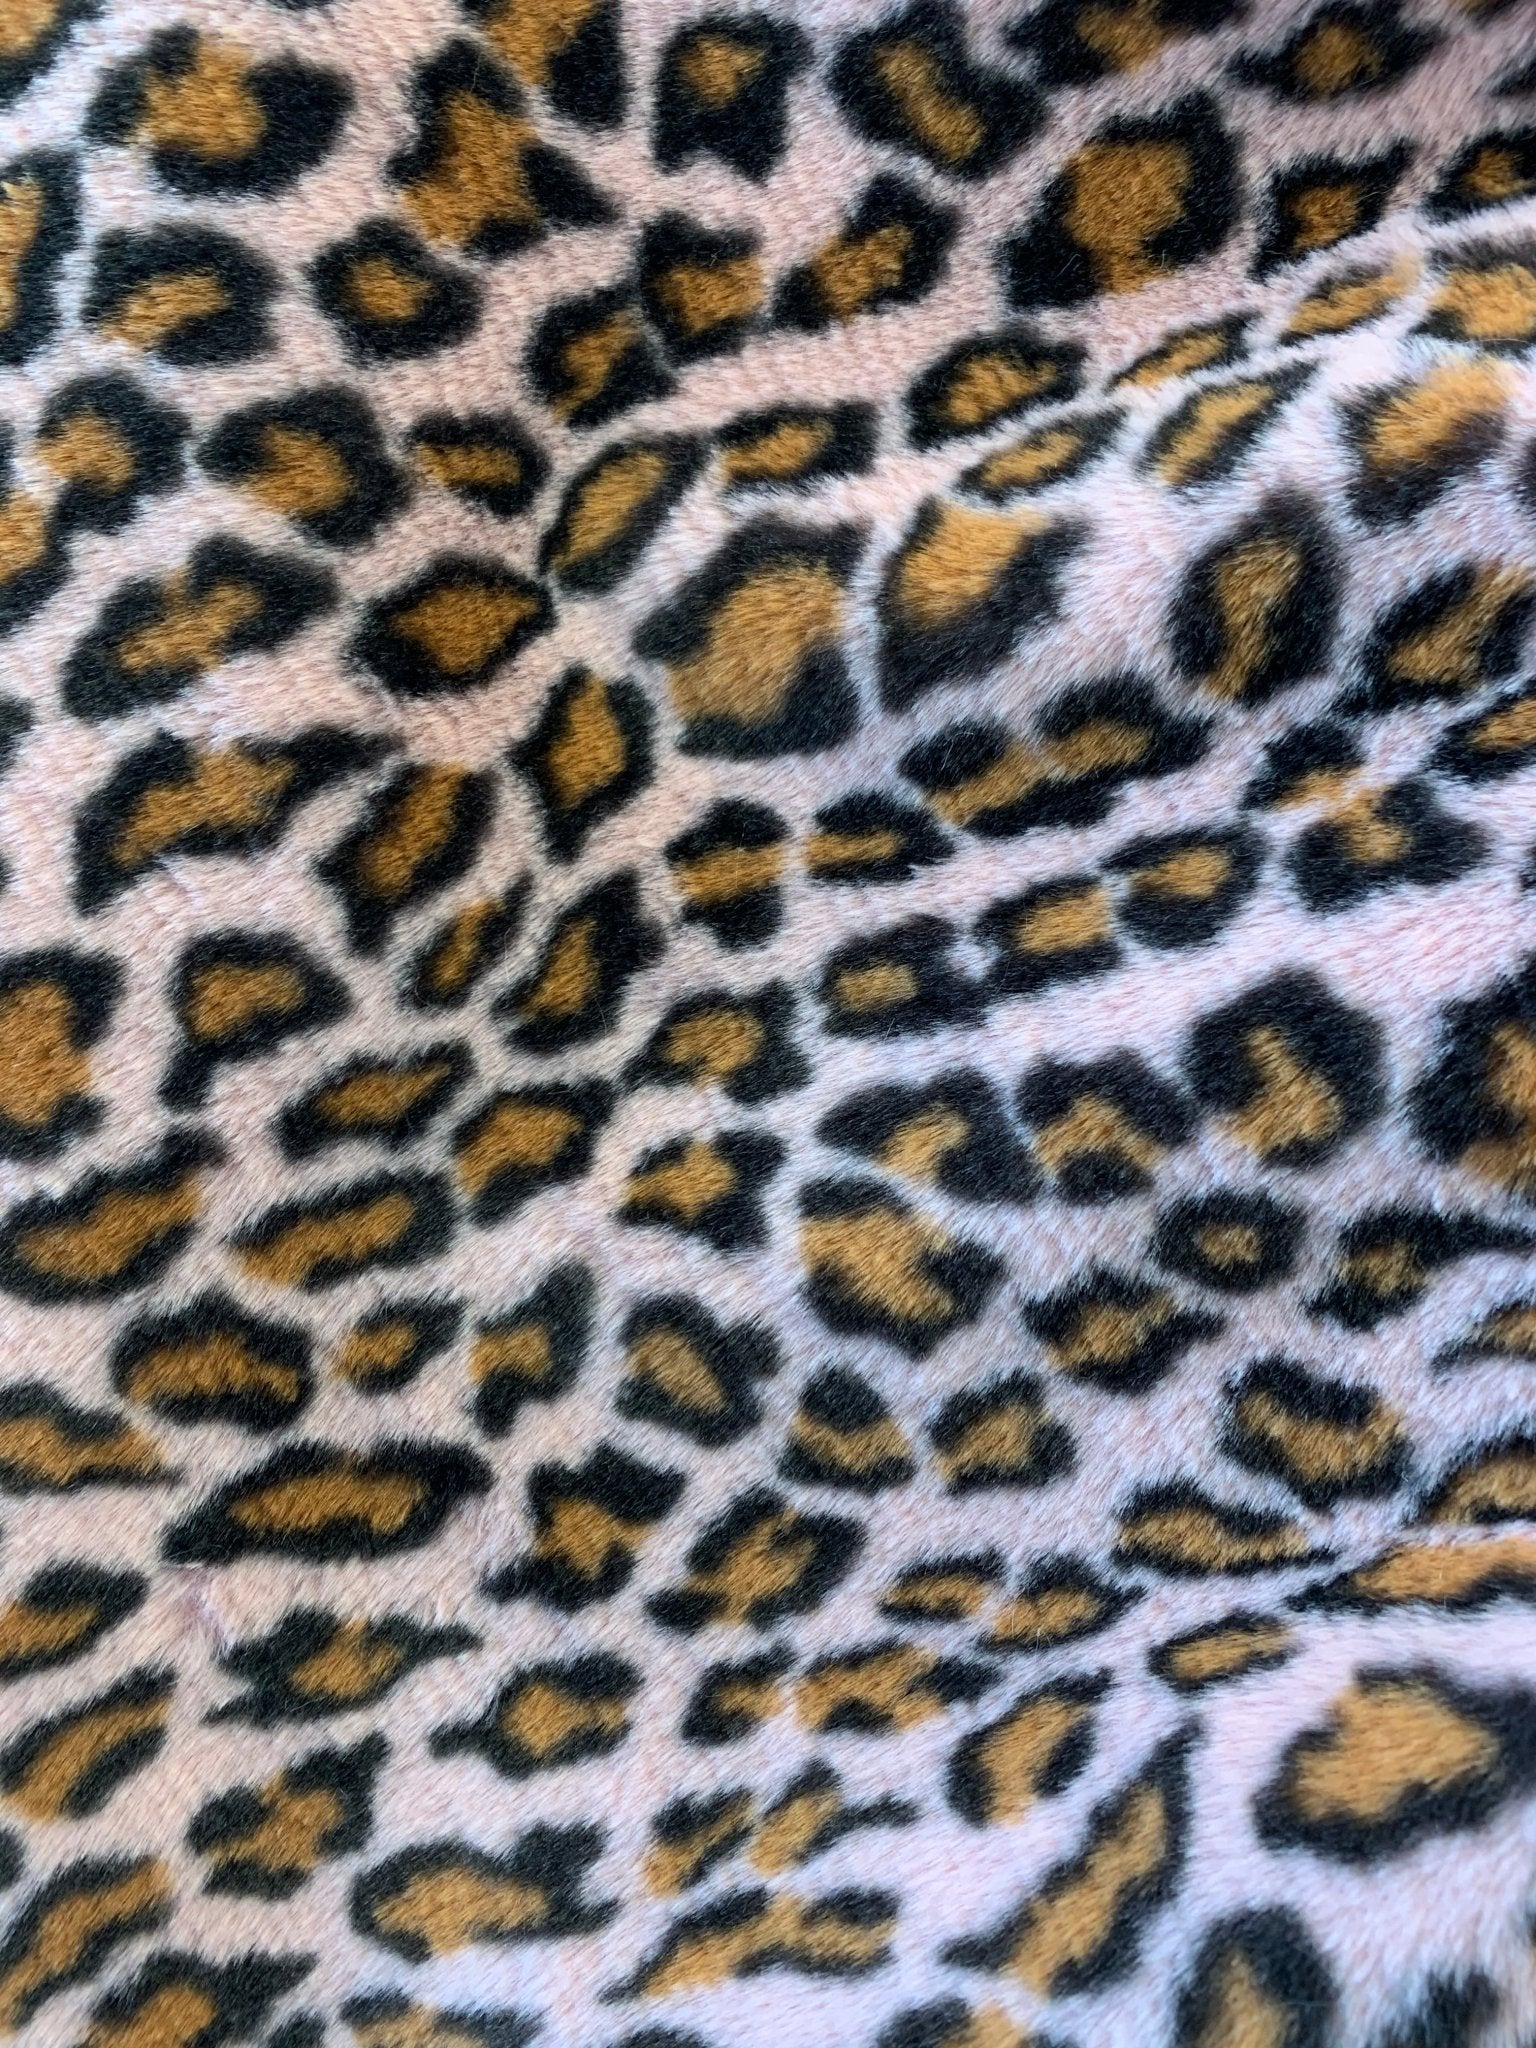 Leopard Fake Faux Fur Fabric By The Yard - Faux Fur Material Fashion FabricICEFABRICICE FABRICSPinkBy The Yard (60 inches Wide)Leopard Fake Faux Fur Fabric By The Yard - Faux Fur Material Fashion Fabric ICEFABRIC Pink